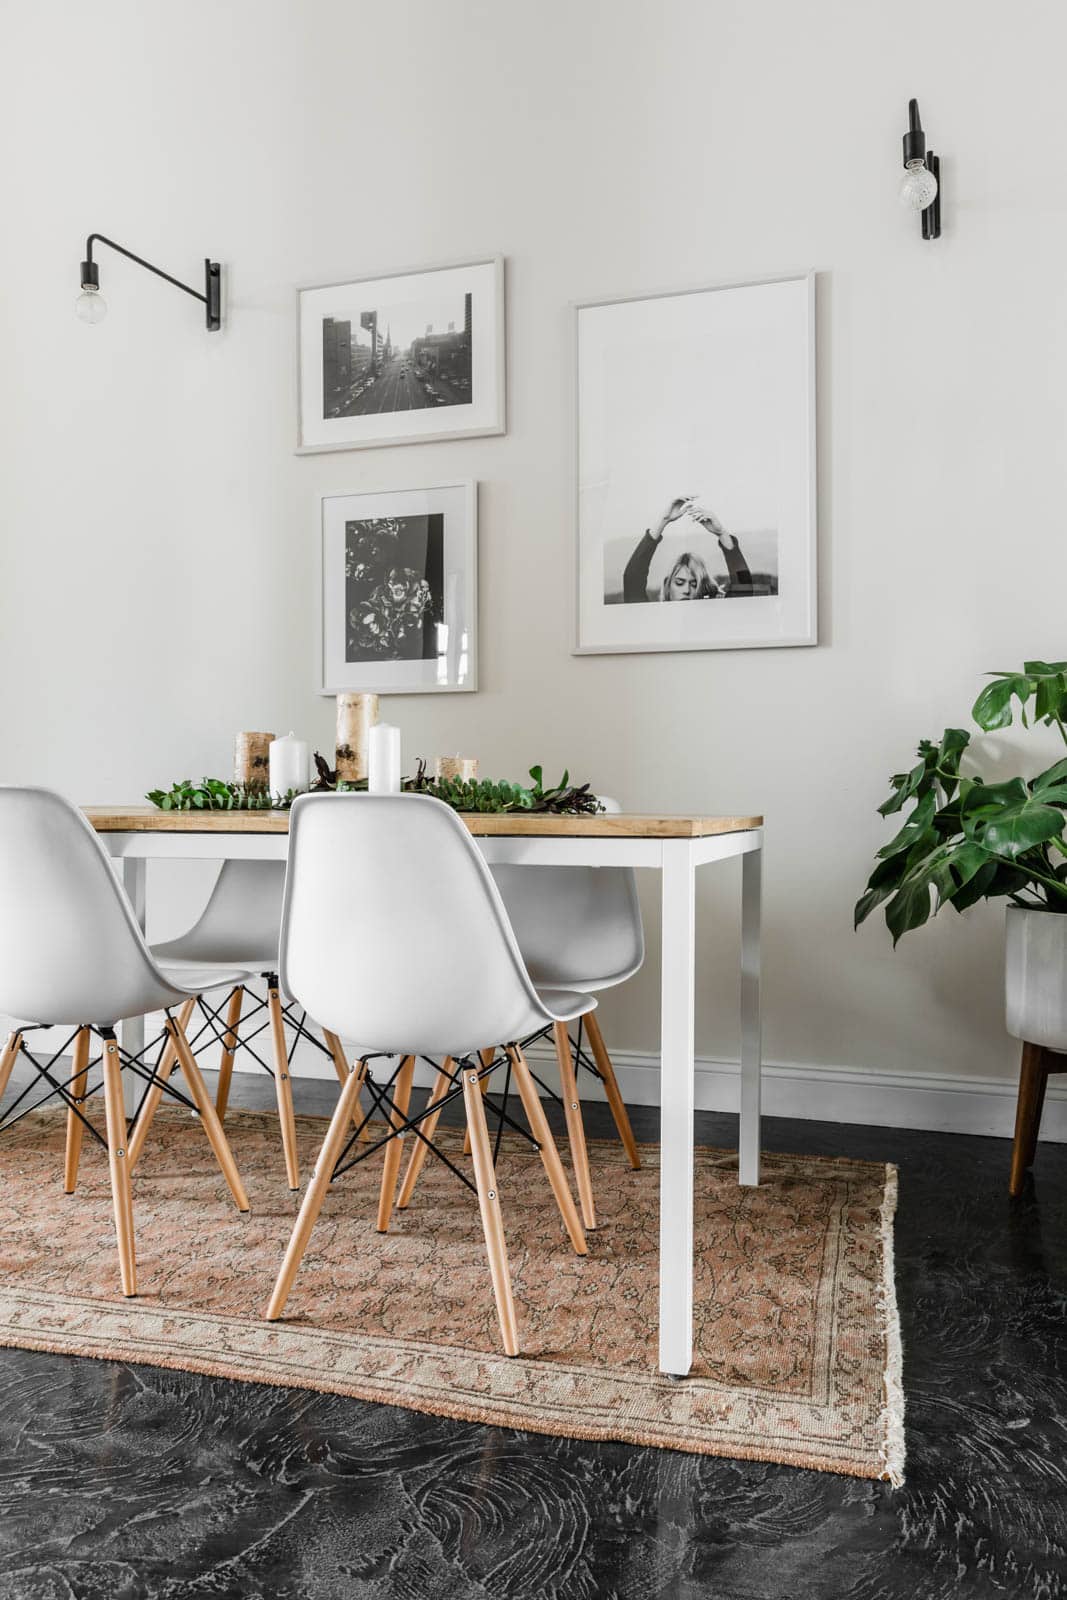 Designing Our Dining Room with Havenly